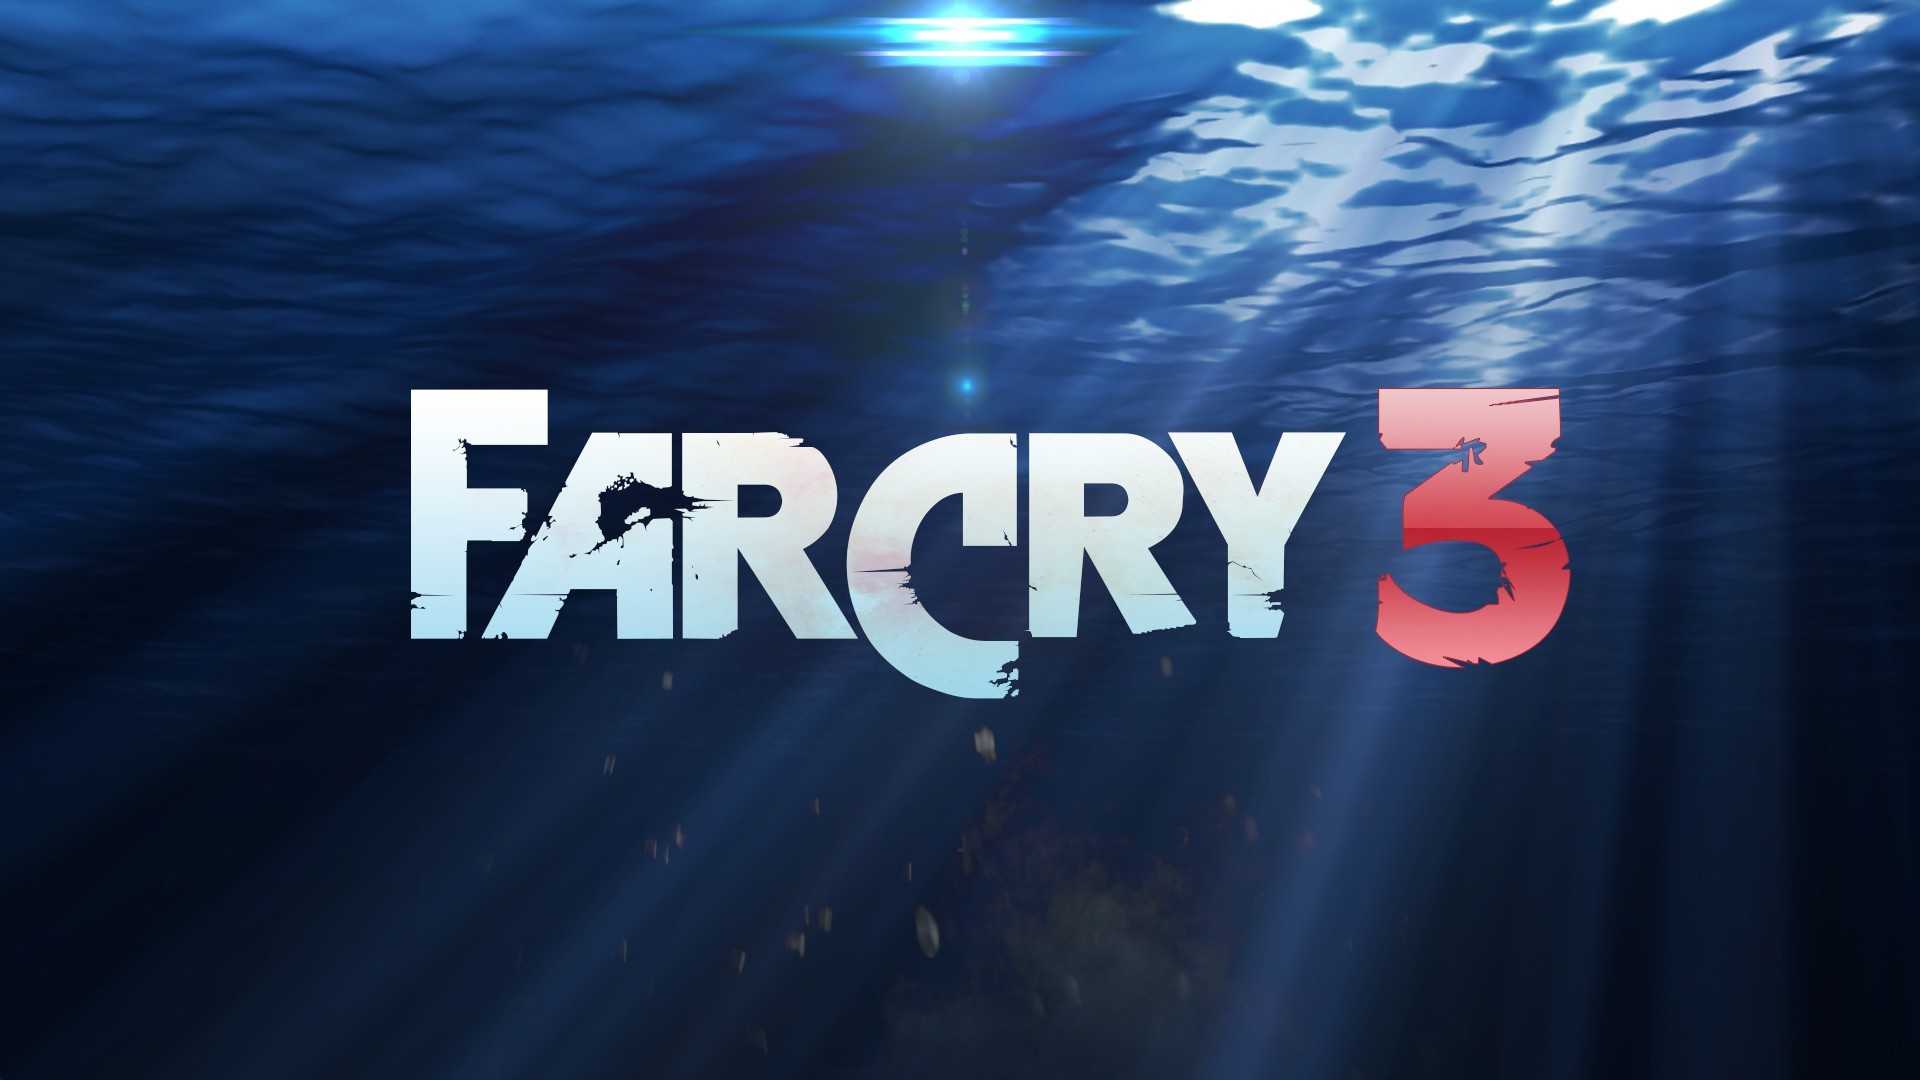 download crack far cry 1 pc